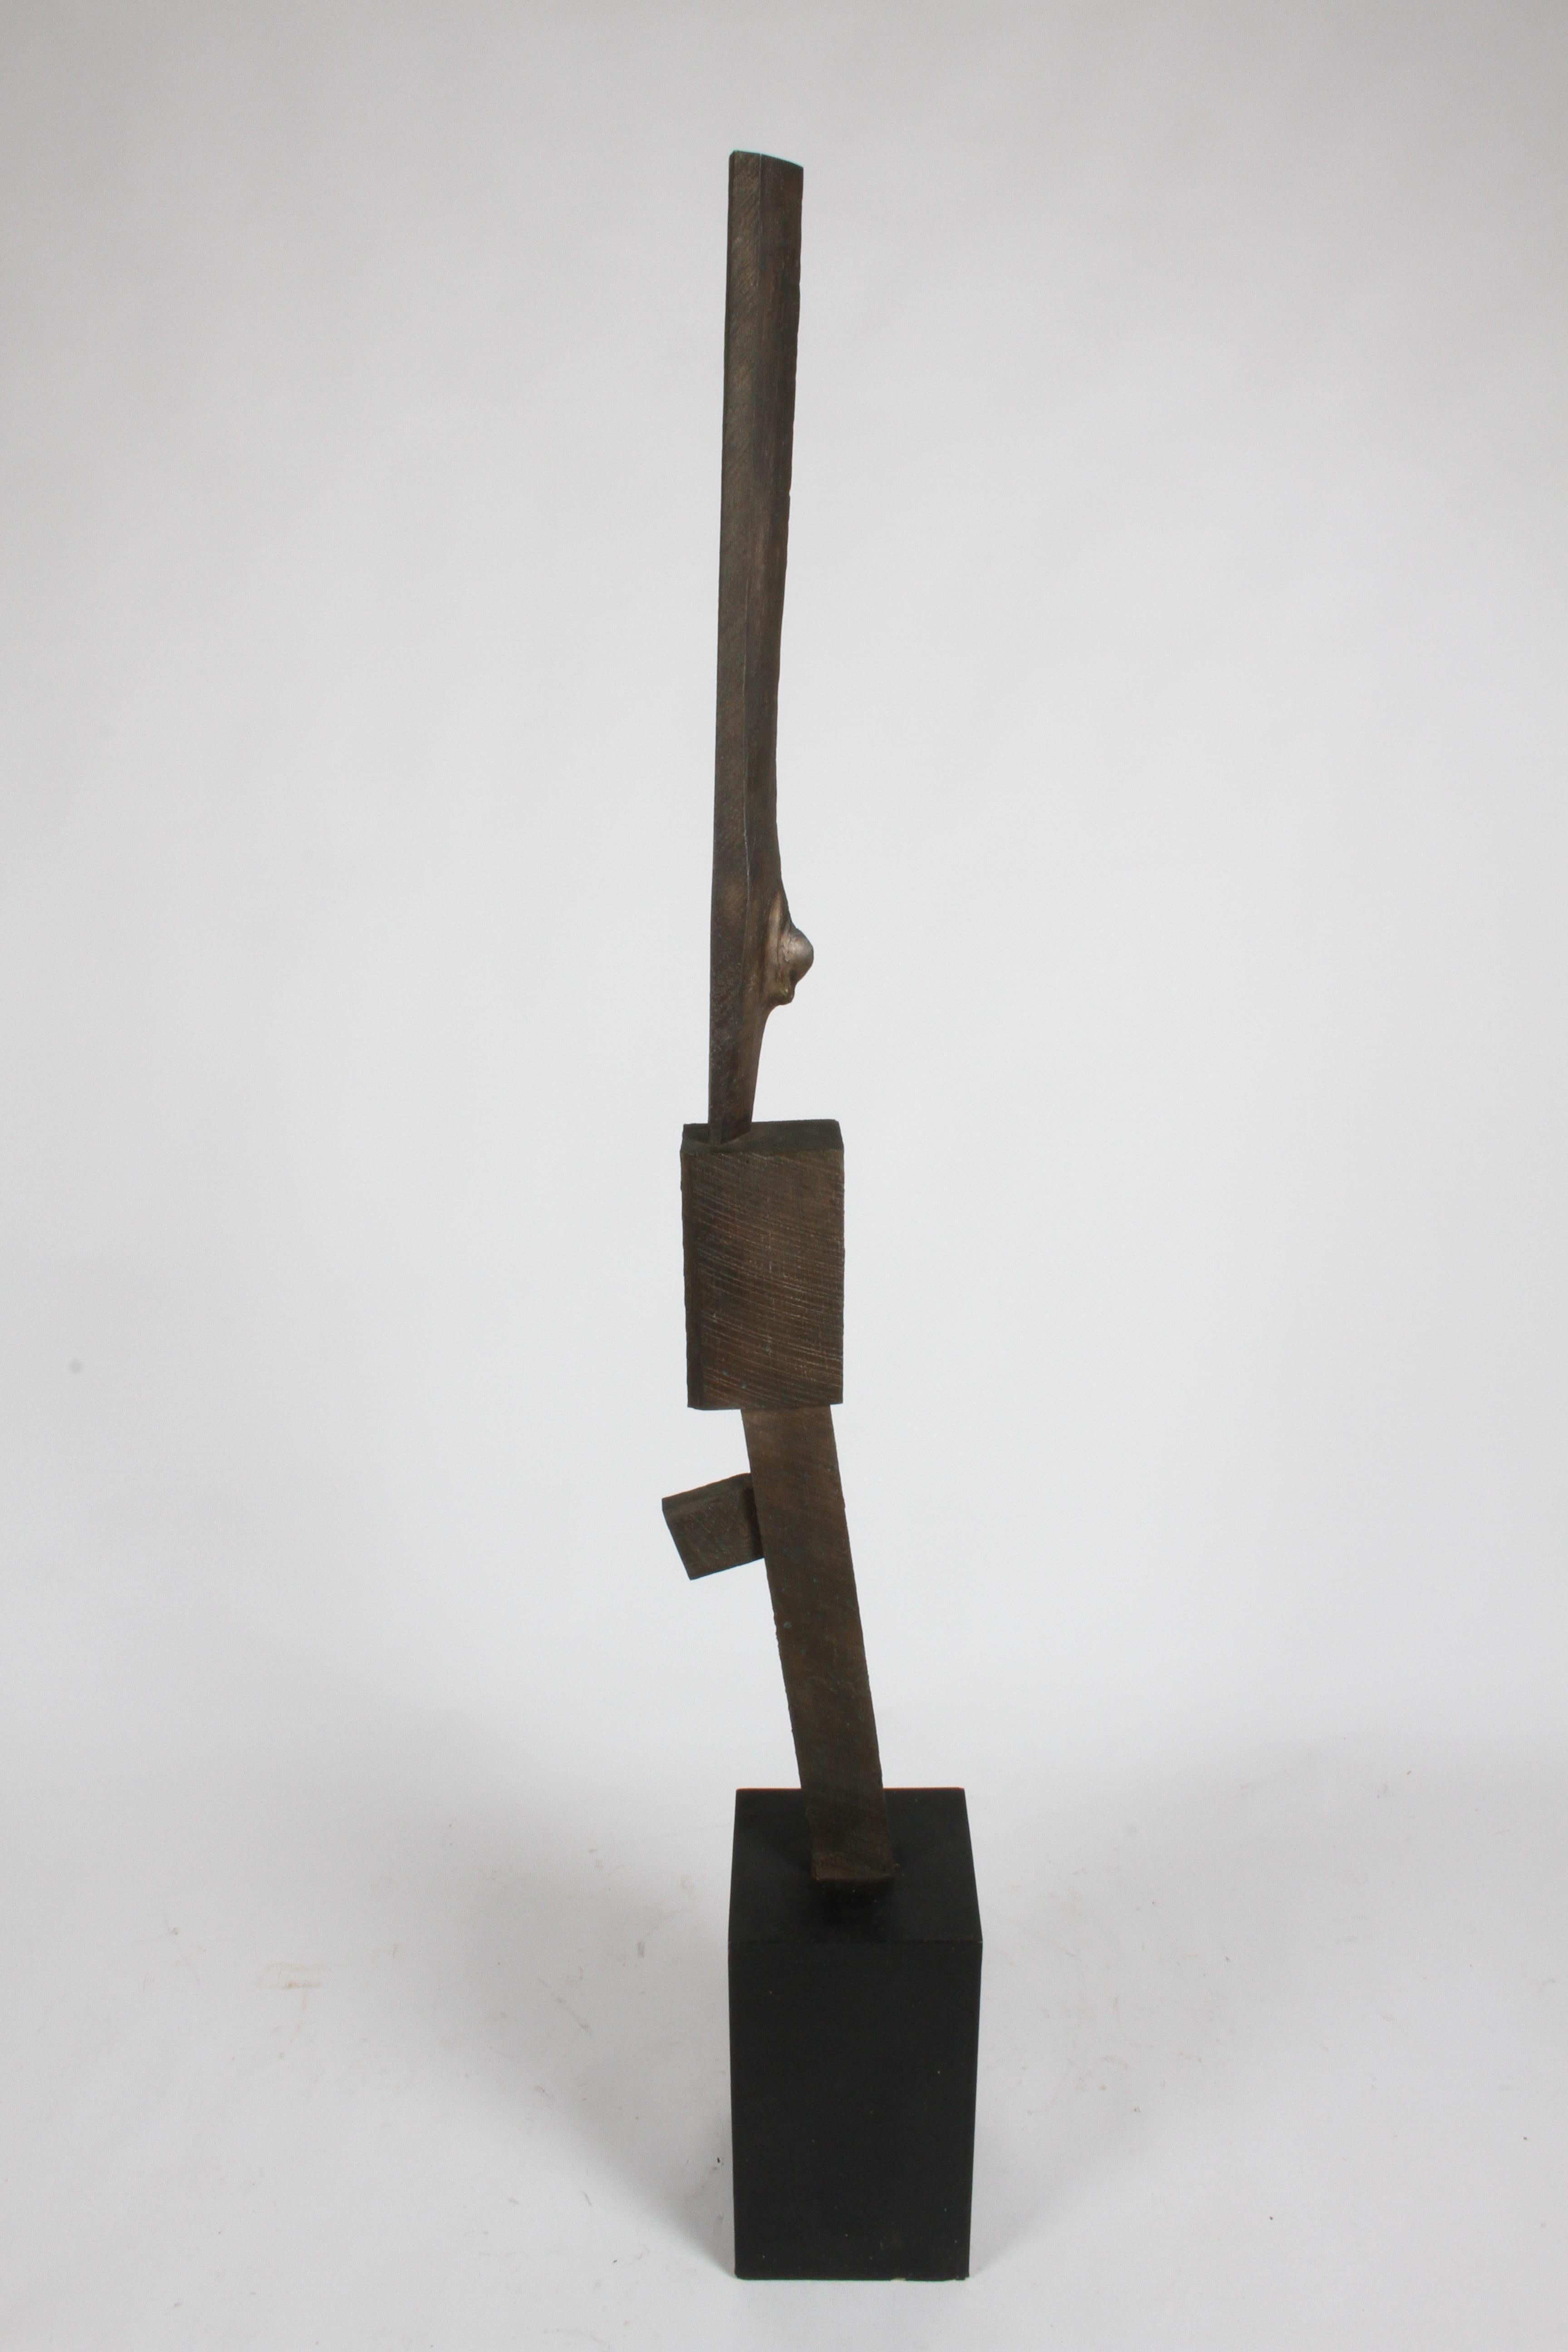 Stunning Mid-Century Modern Brutalist TOTEM bronze sculpture in the style of artist Joel Shapiro. Cast in bronze, the sculpture takes on the surface or texture of the wood grain and knots from the lumber that was used to make it. Applied patina to